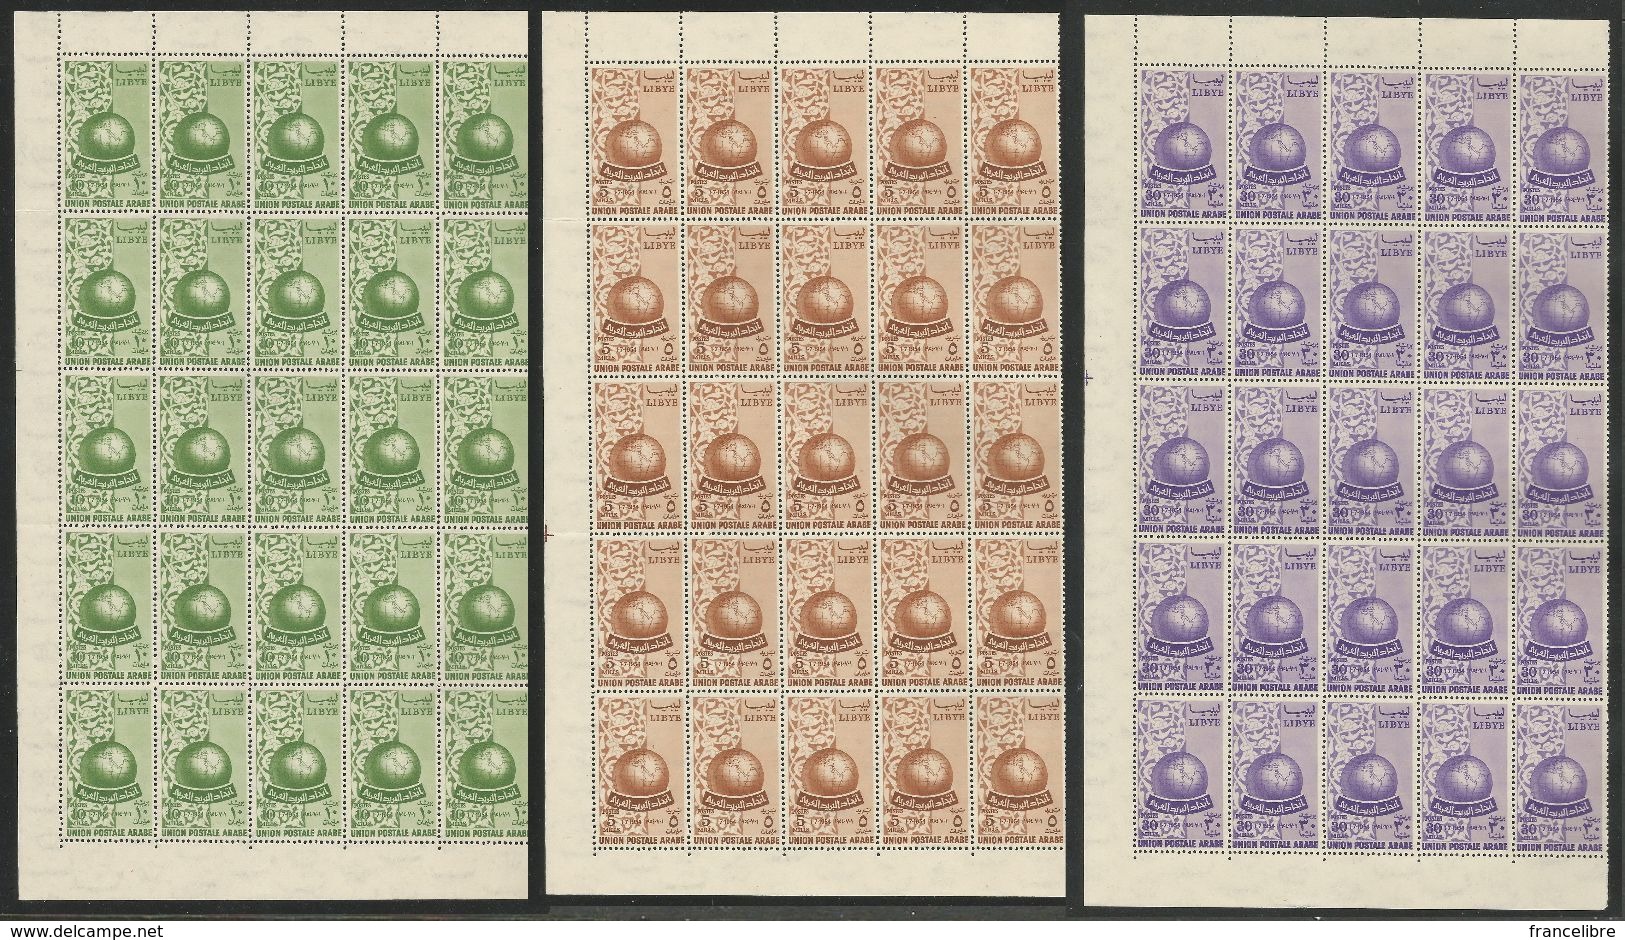 Libya, Arab Postal Unoion 1954 In Block Of 25 Sets, MINT NEVER HINGED. (Block Is Folded Through Perforation) - Libya